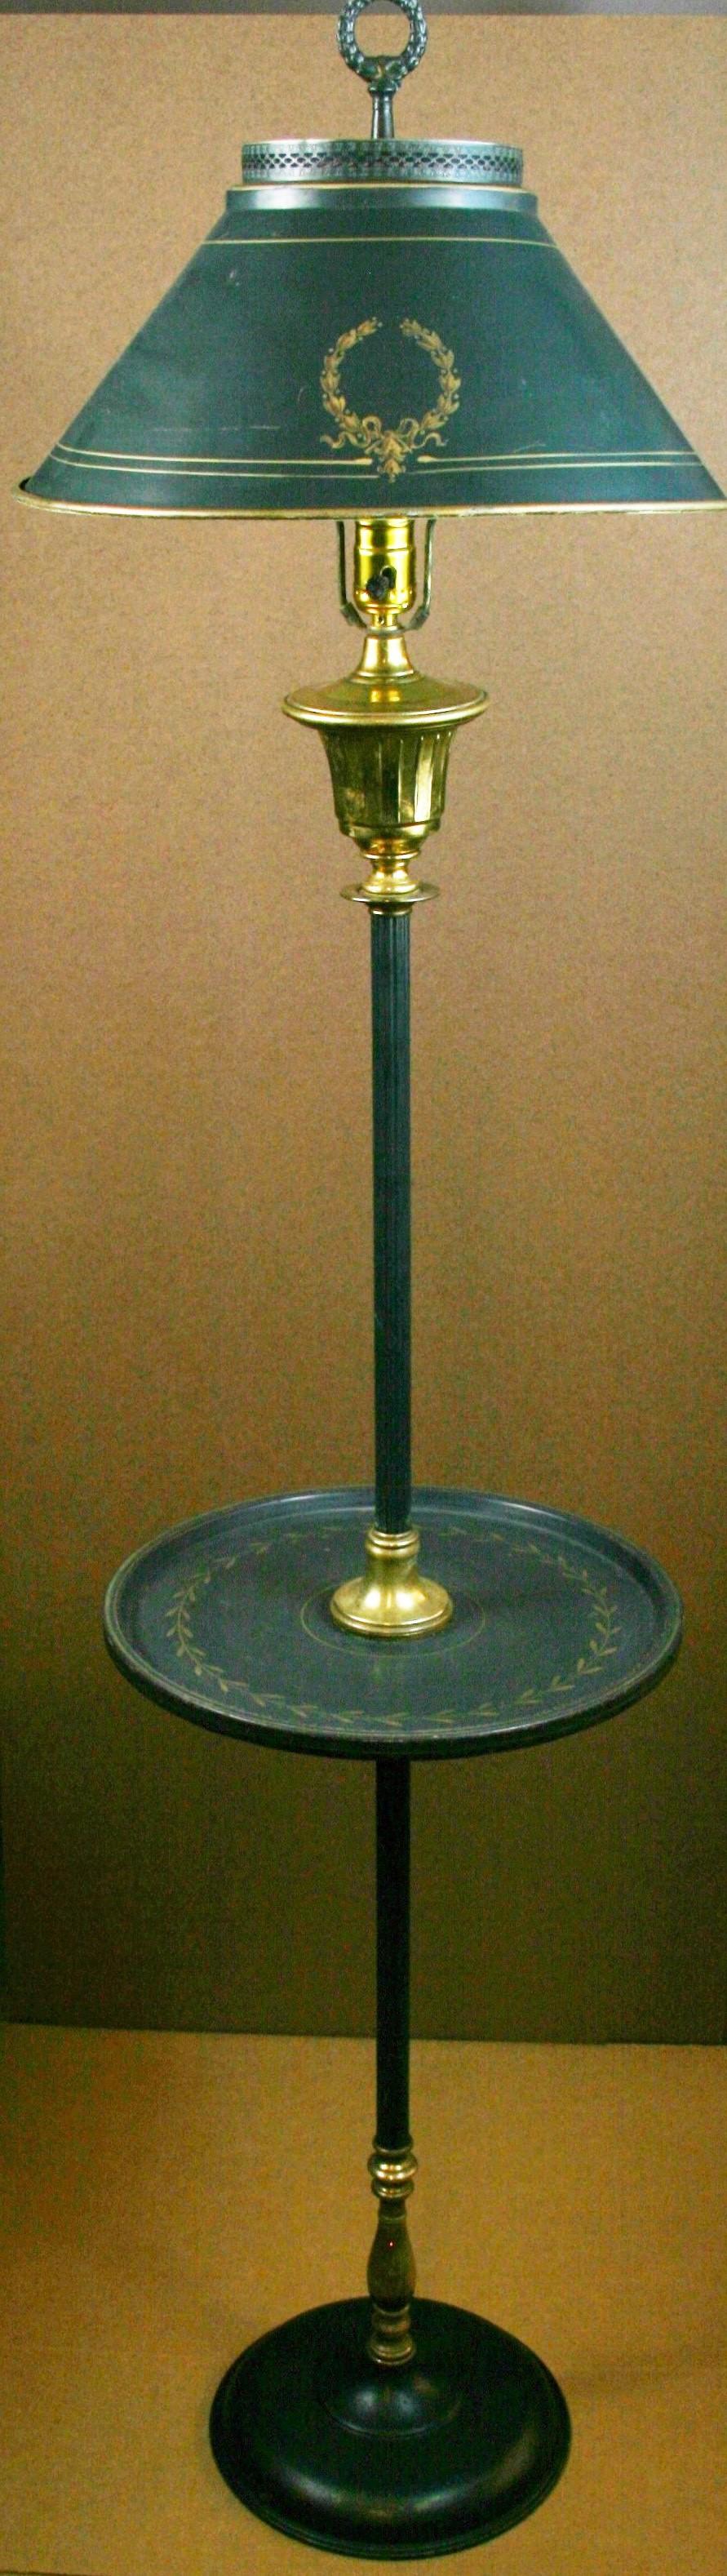 3-755 French tole and brass floor lamp with attached table
Hand painted details
Rewired takes on Edison based bulb 100 watt max
16